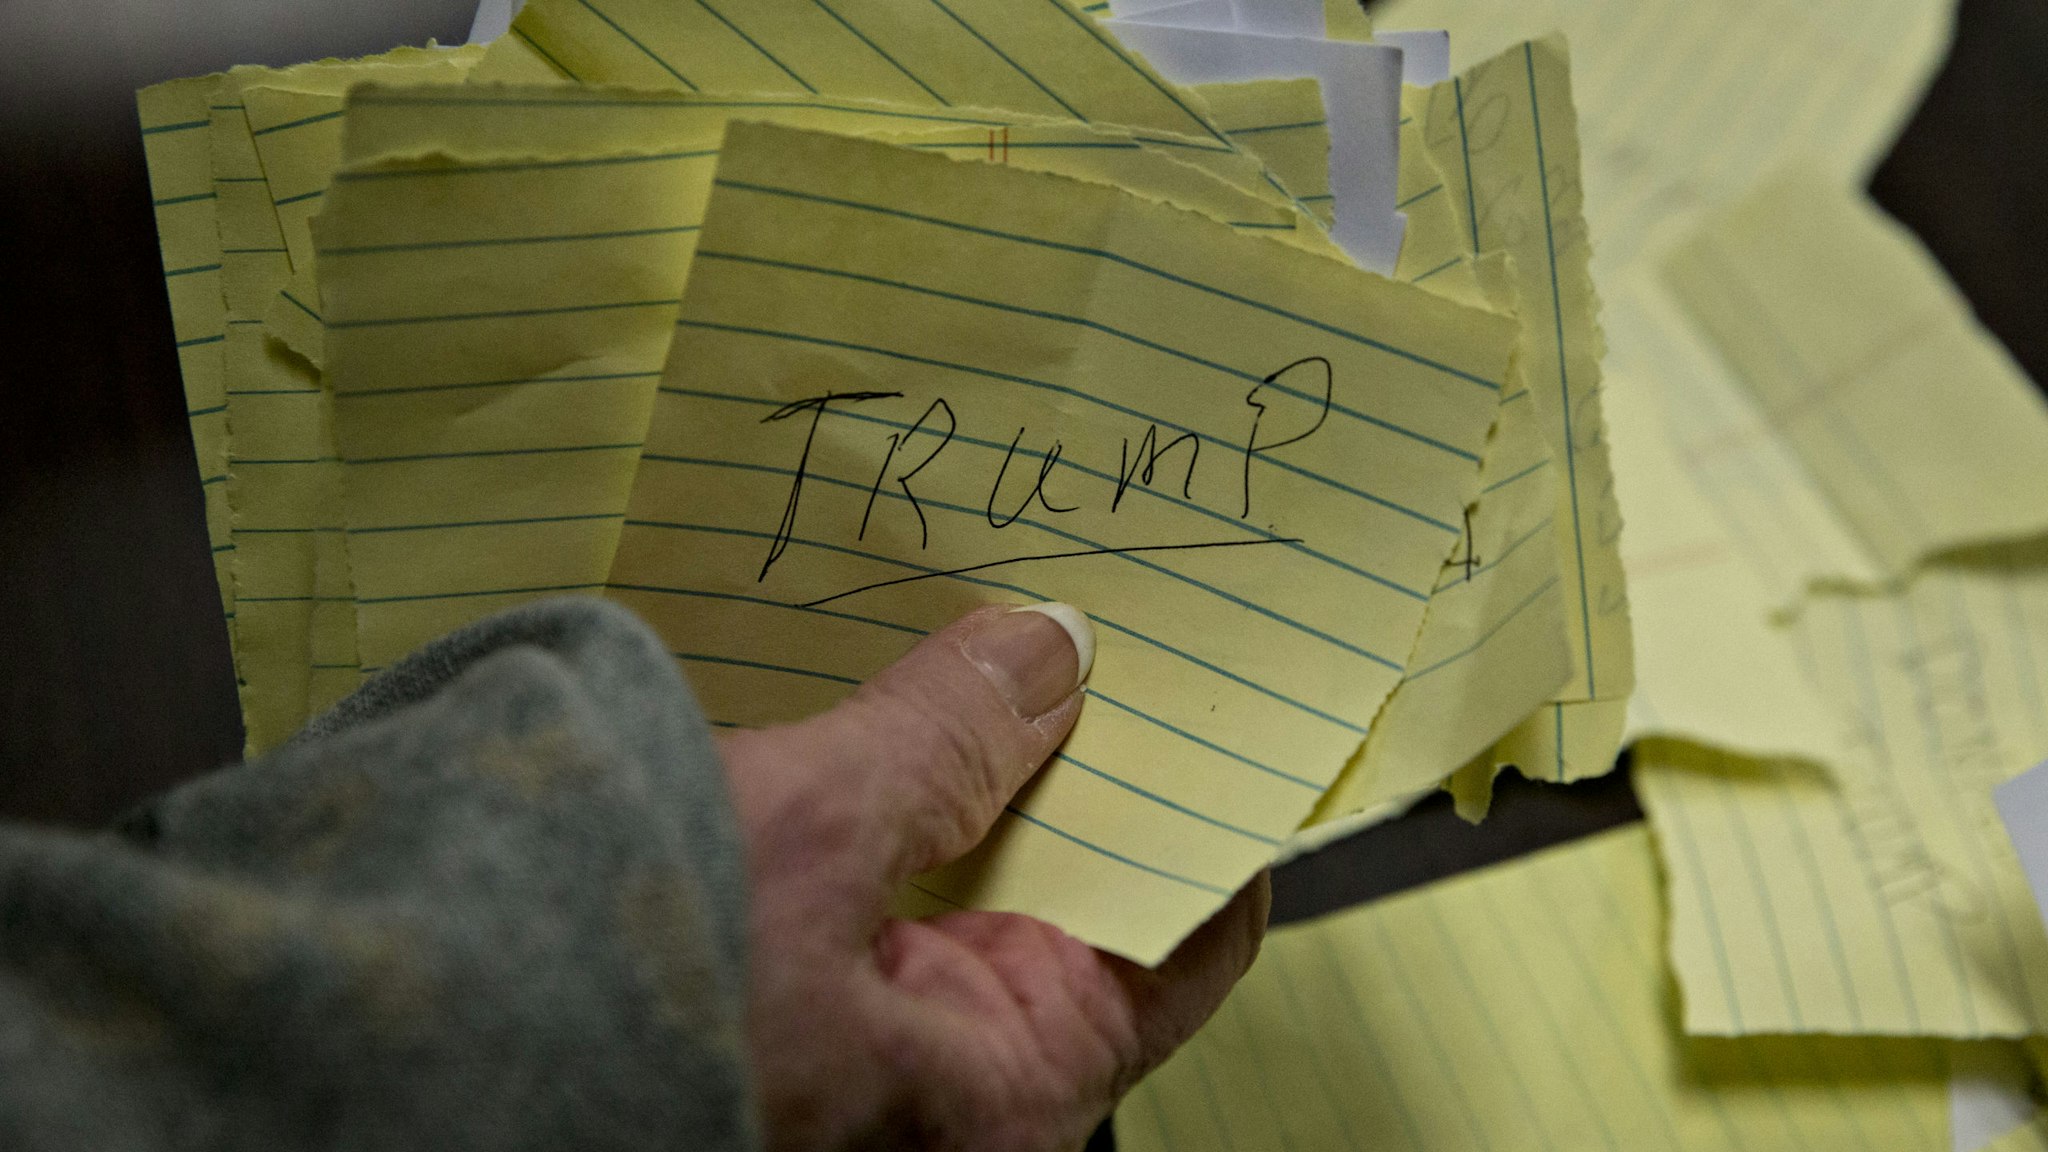 Paper ballots for Donald Trump, president and chief executive of Trump Organization Inc. and 2016 Republican presidential candidate, are organized during the first-in-the-nation Iowa caucus in the Brody Middle School cafeteria in Des Moines, Iowa, U.S., on Monday, Feb. 1, 2016. Iowans headed to statewide Republican and Democratic caucuses on Monday night with the assignment of rendering an initial verdict of the 2016 presidential campaign. Photographer: Andrew Harrer/Bloomberg via Getty Images